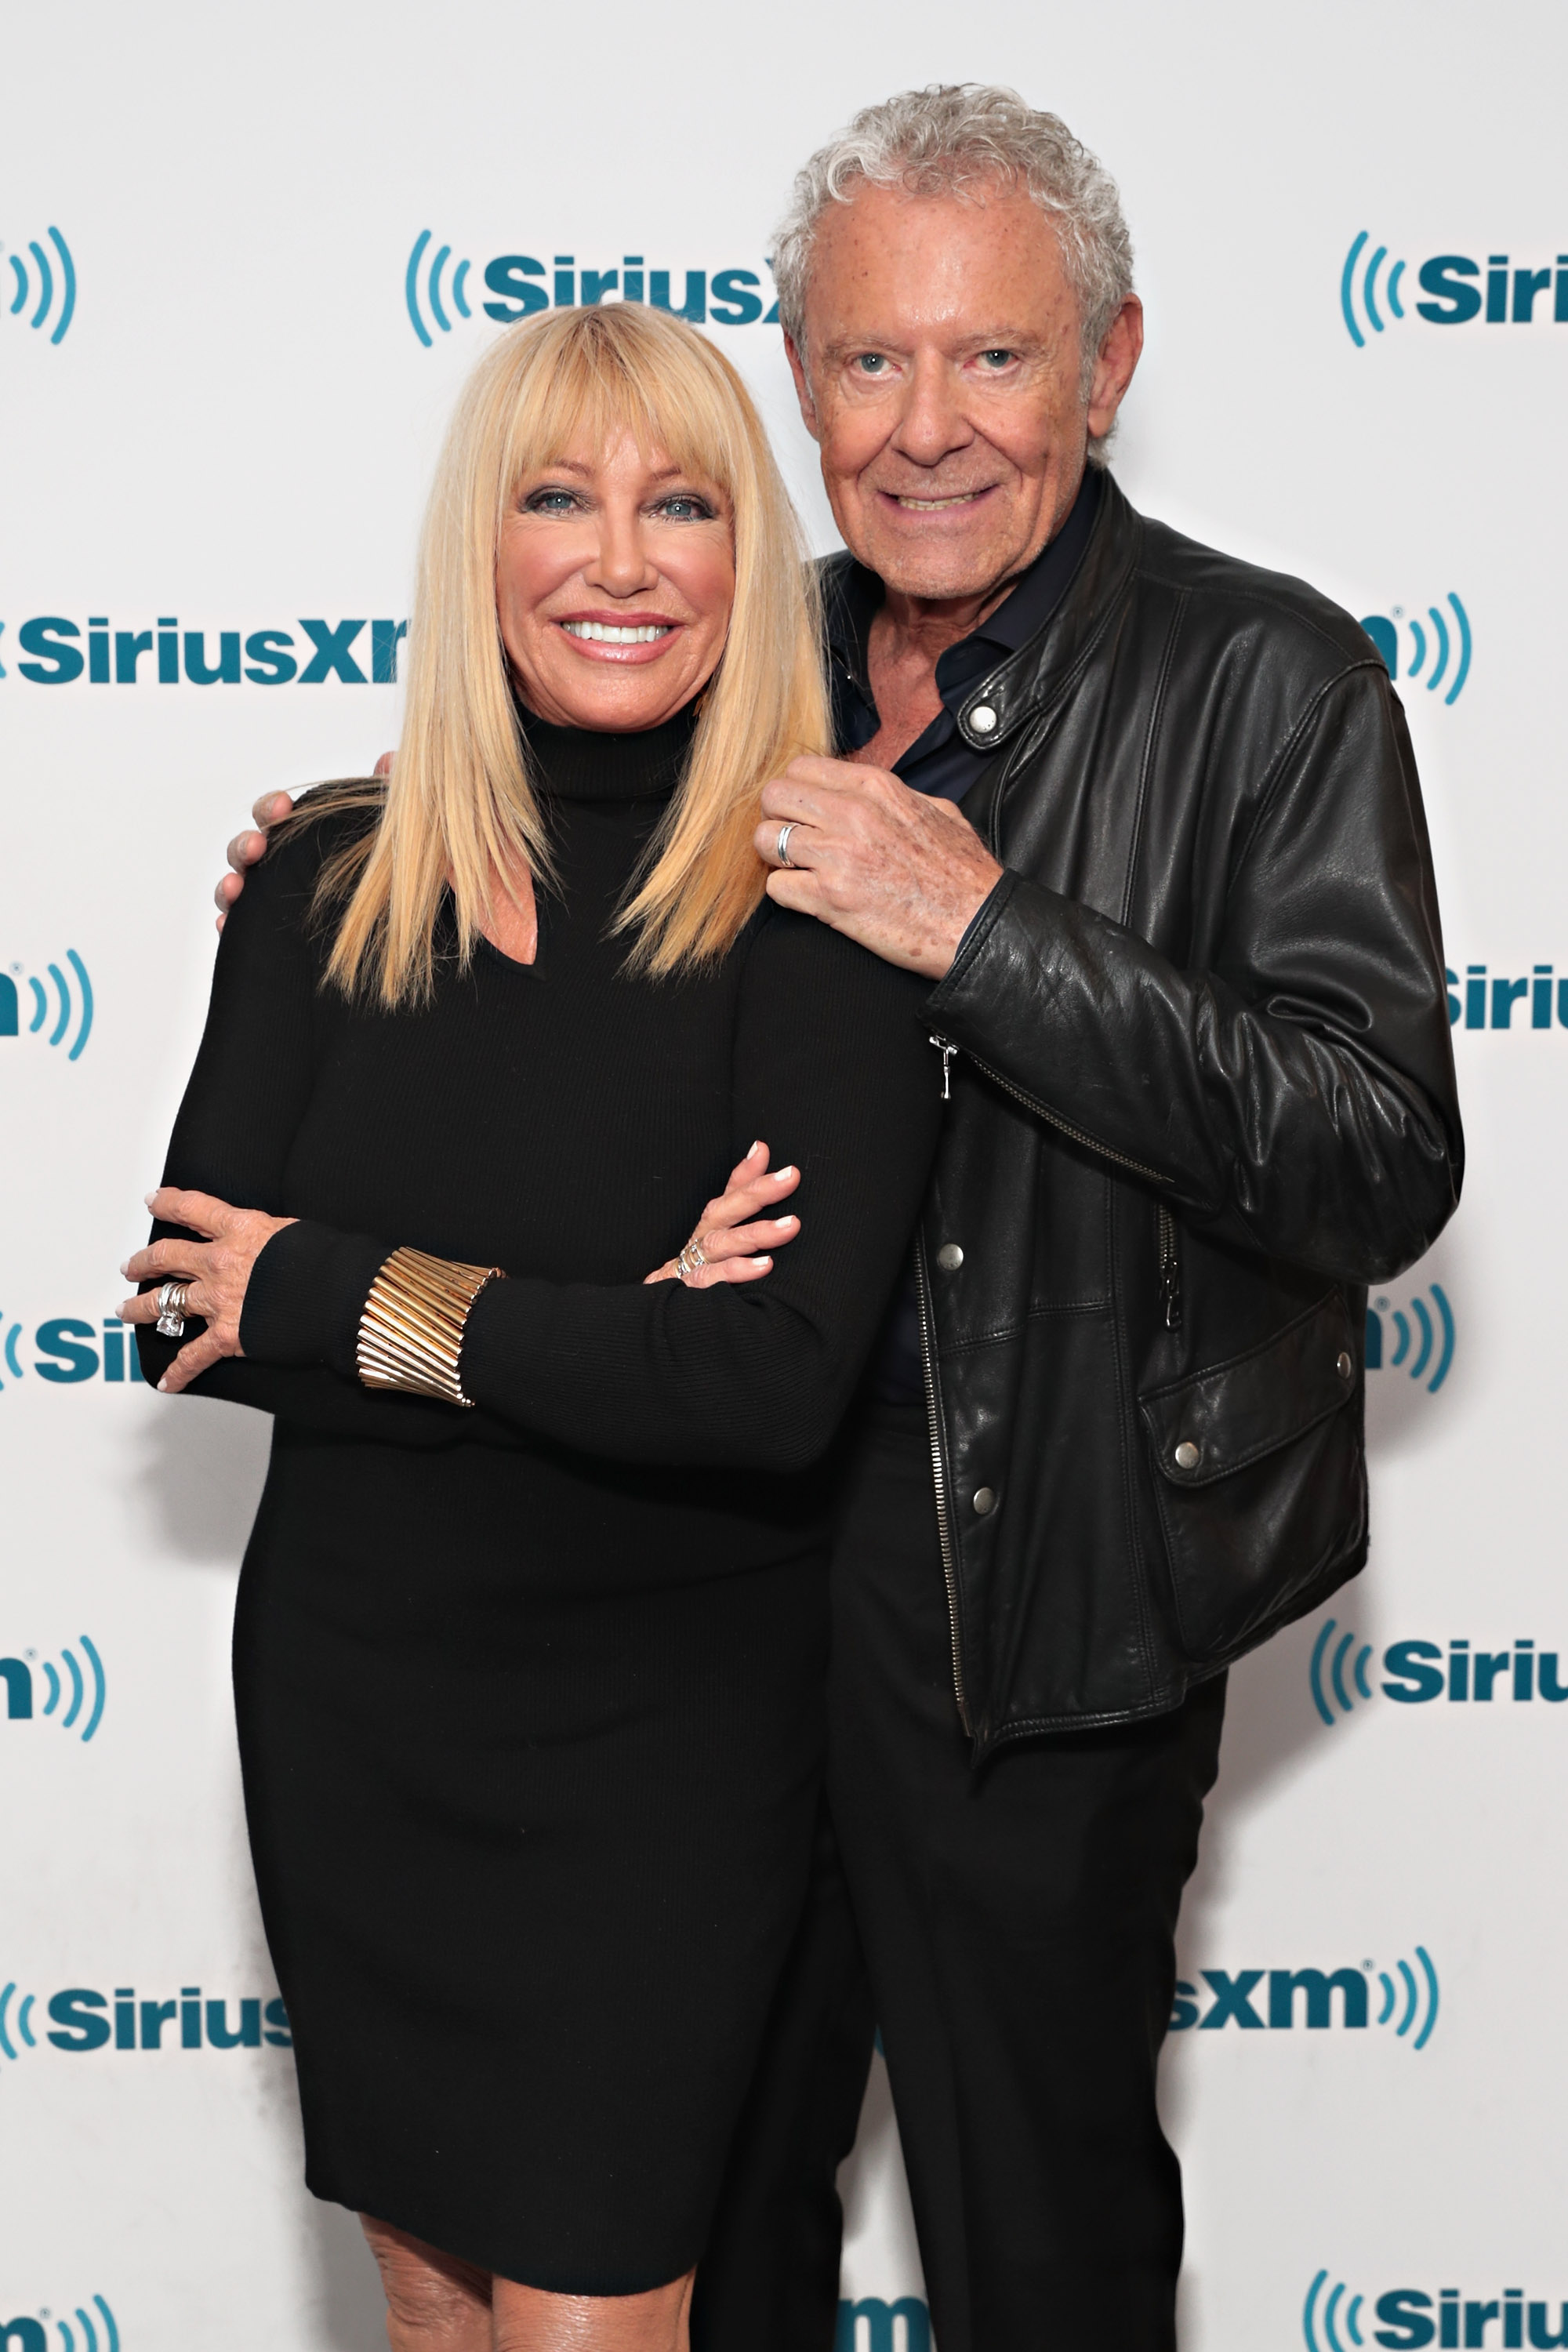 Suzanne Somers and Alan Hamel visit the SiriusXM Studios in New York City on November 15, 2017 | Source: Getty Images